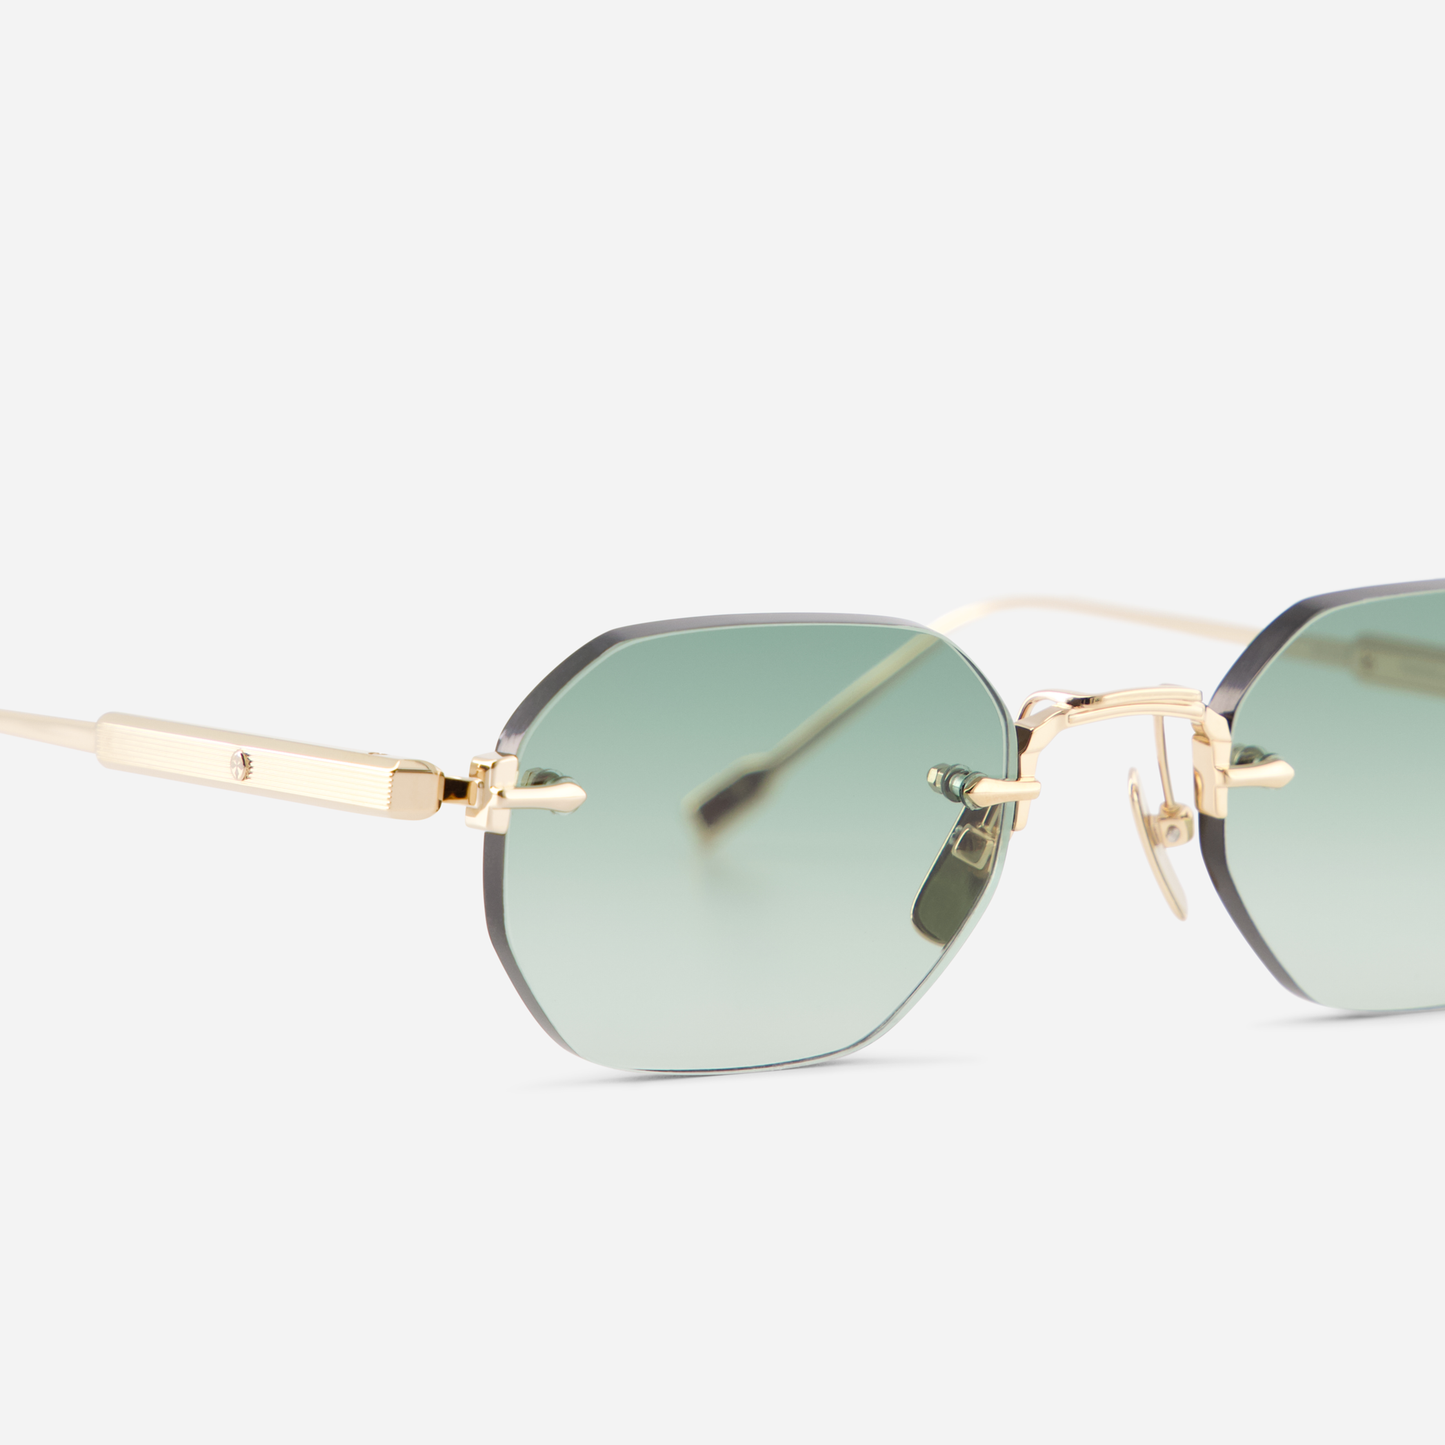 Terebellum II S702, featuring a square rimless shape, Lunar Gold embellishments, and striking gradient green lenses.